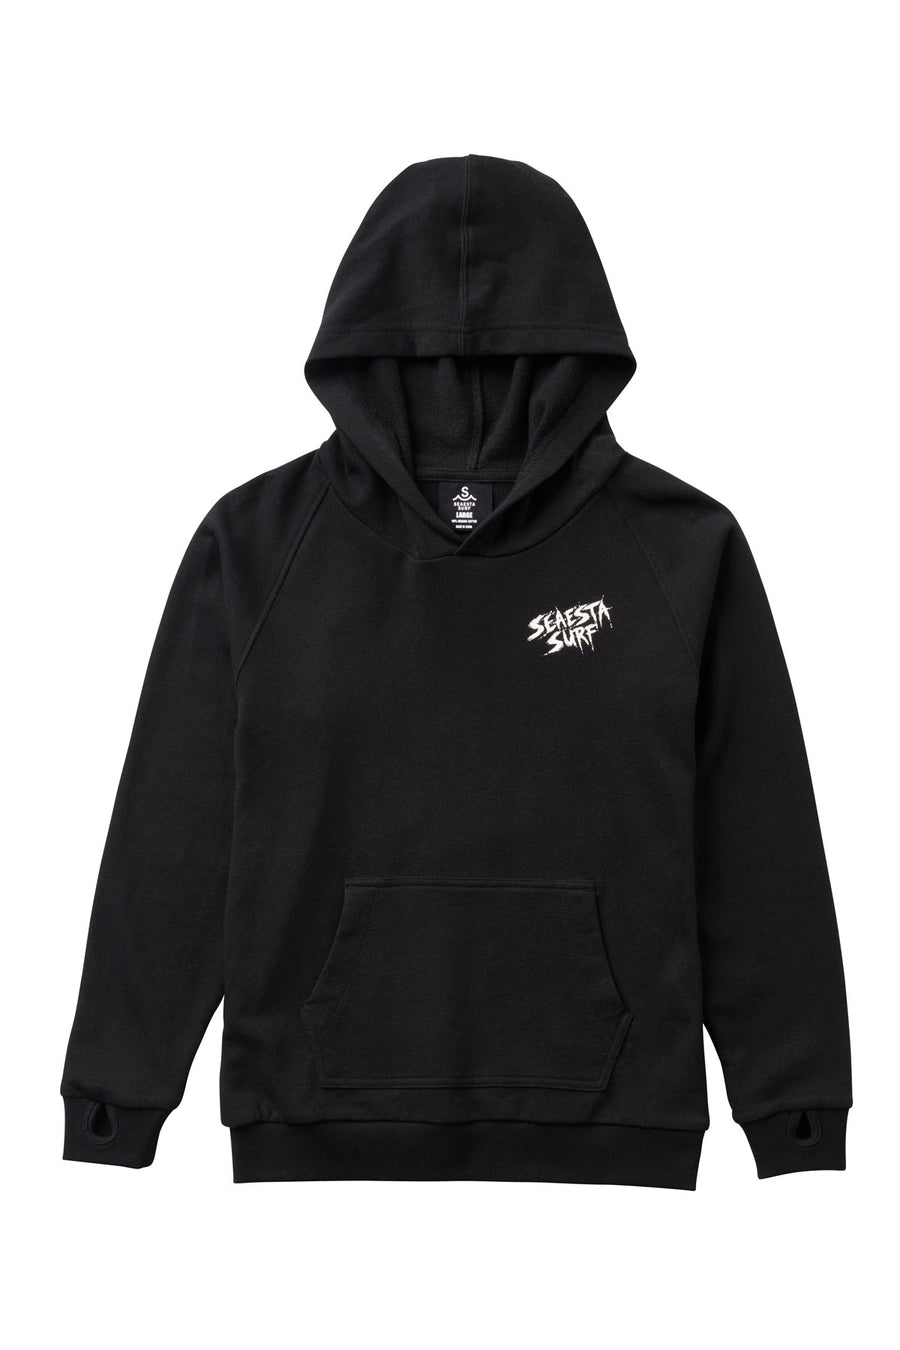 Seaesta Surf Black Hoodie with Tie Dye Graphic / Youth